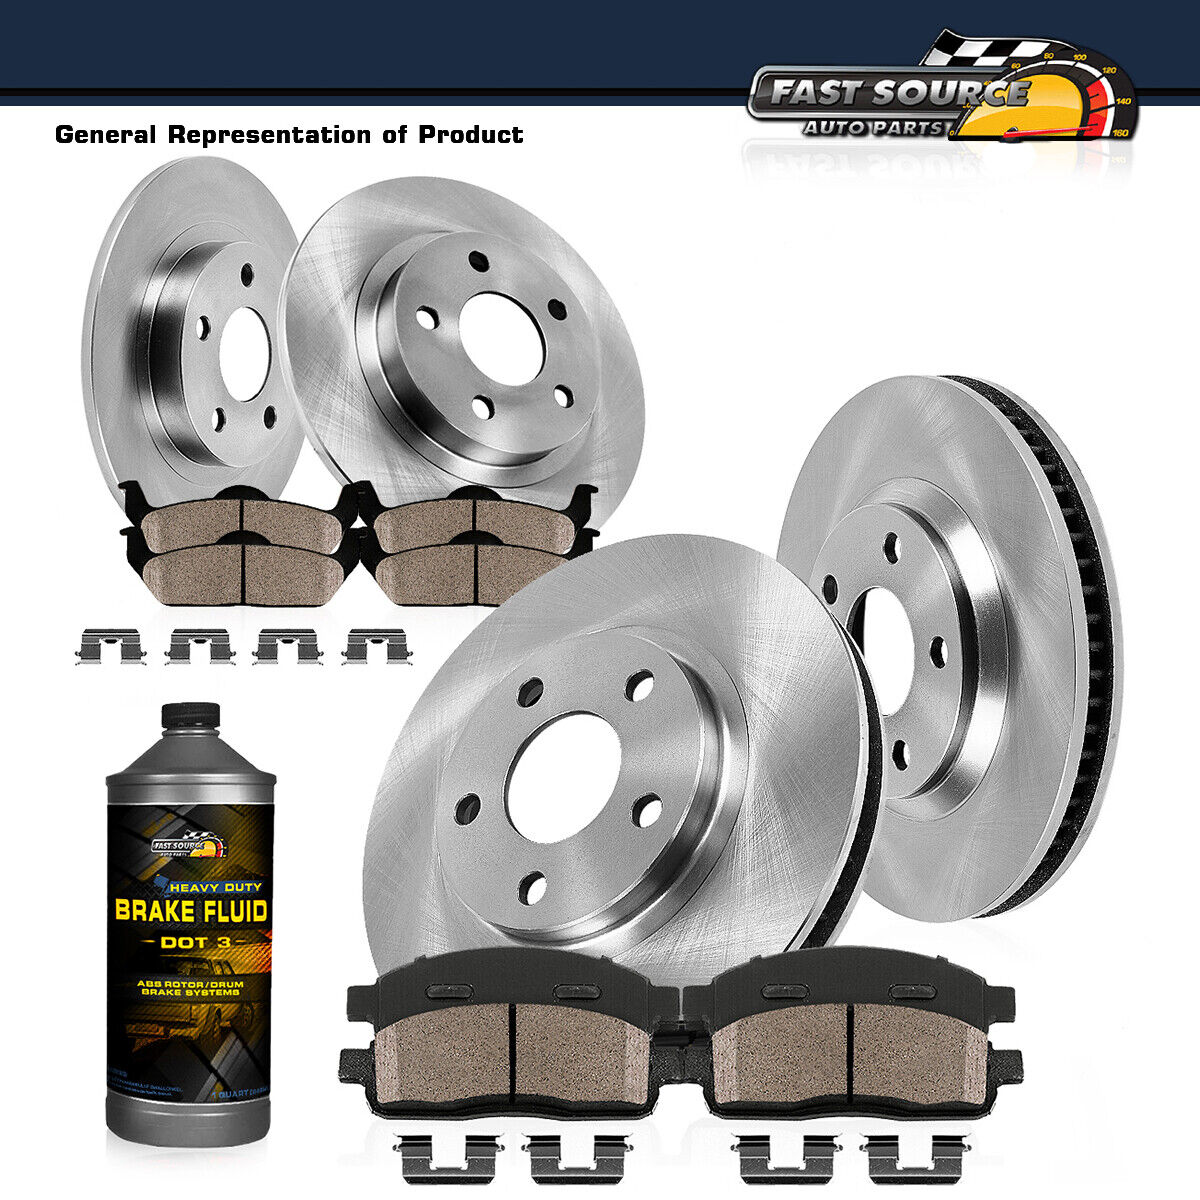 For Lexus RX350 RX450H Toyota Highlander Sienna Front+Rear Rotors & Ceramic Pads